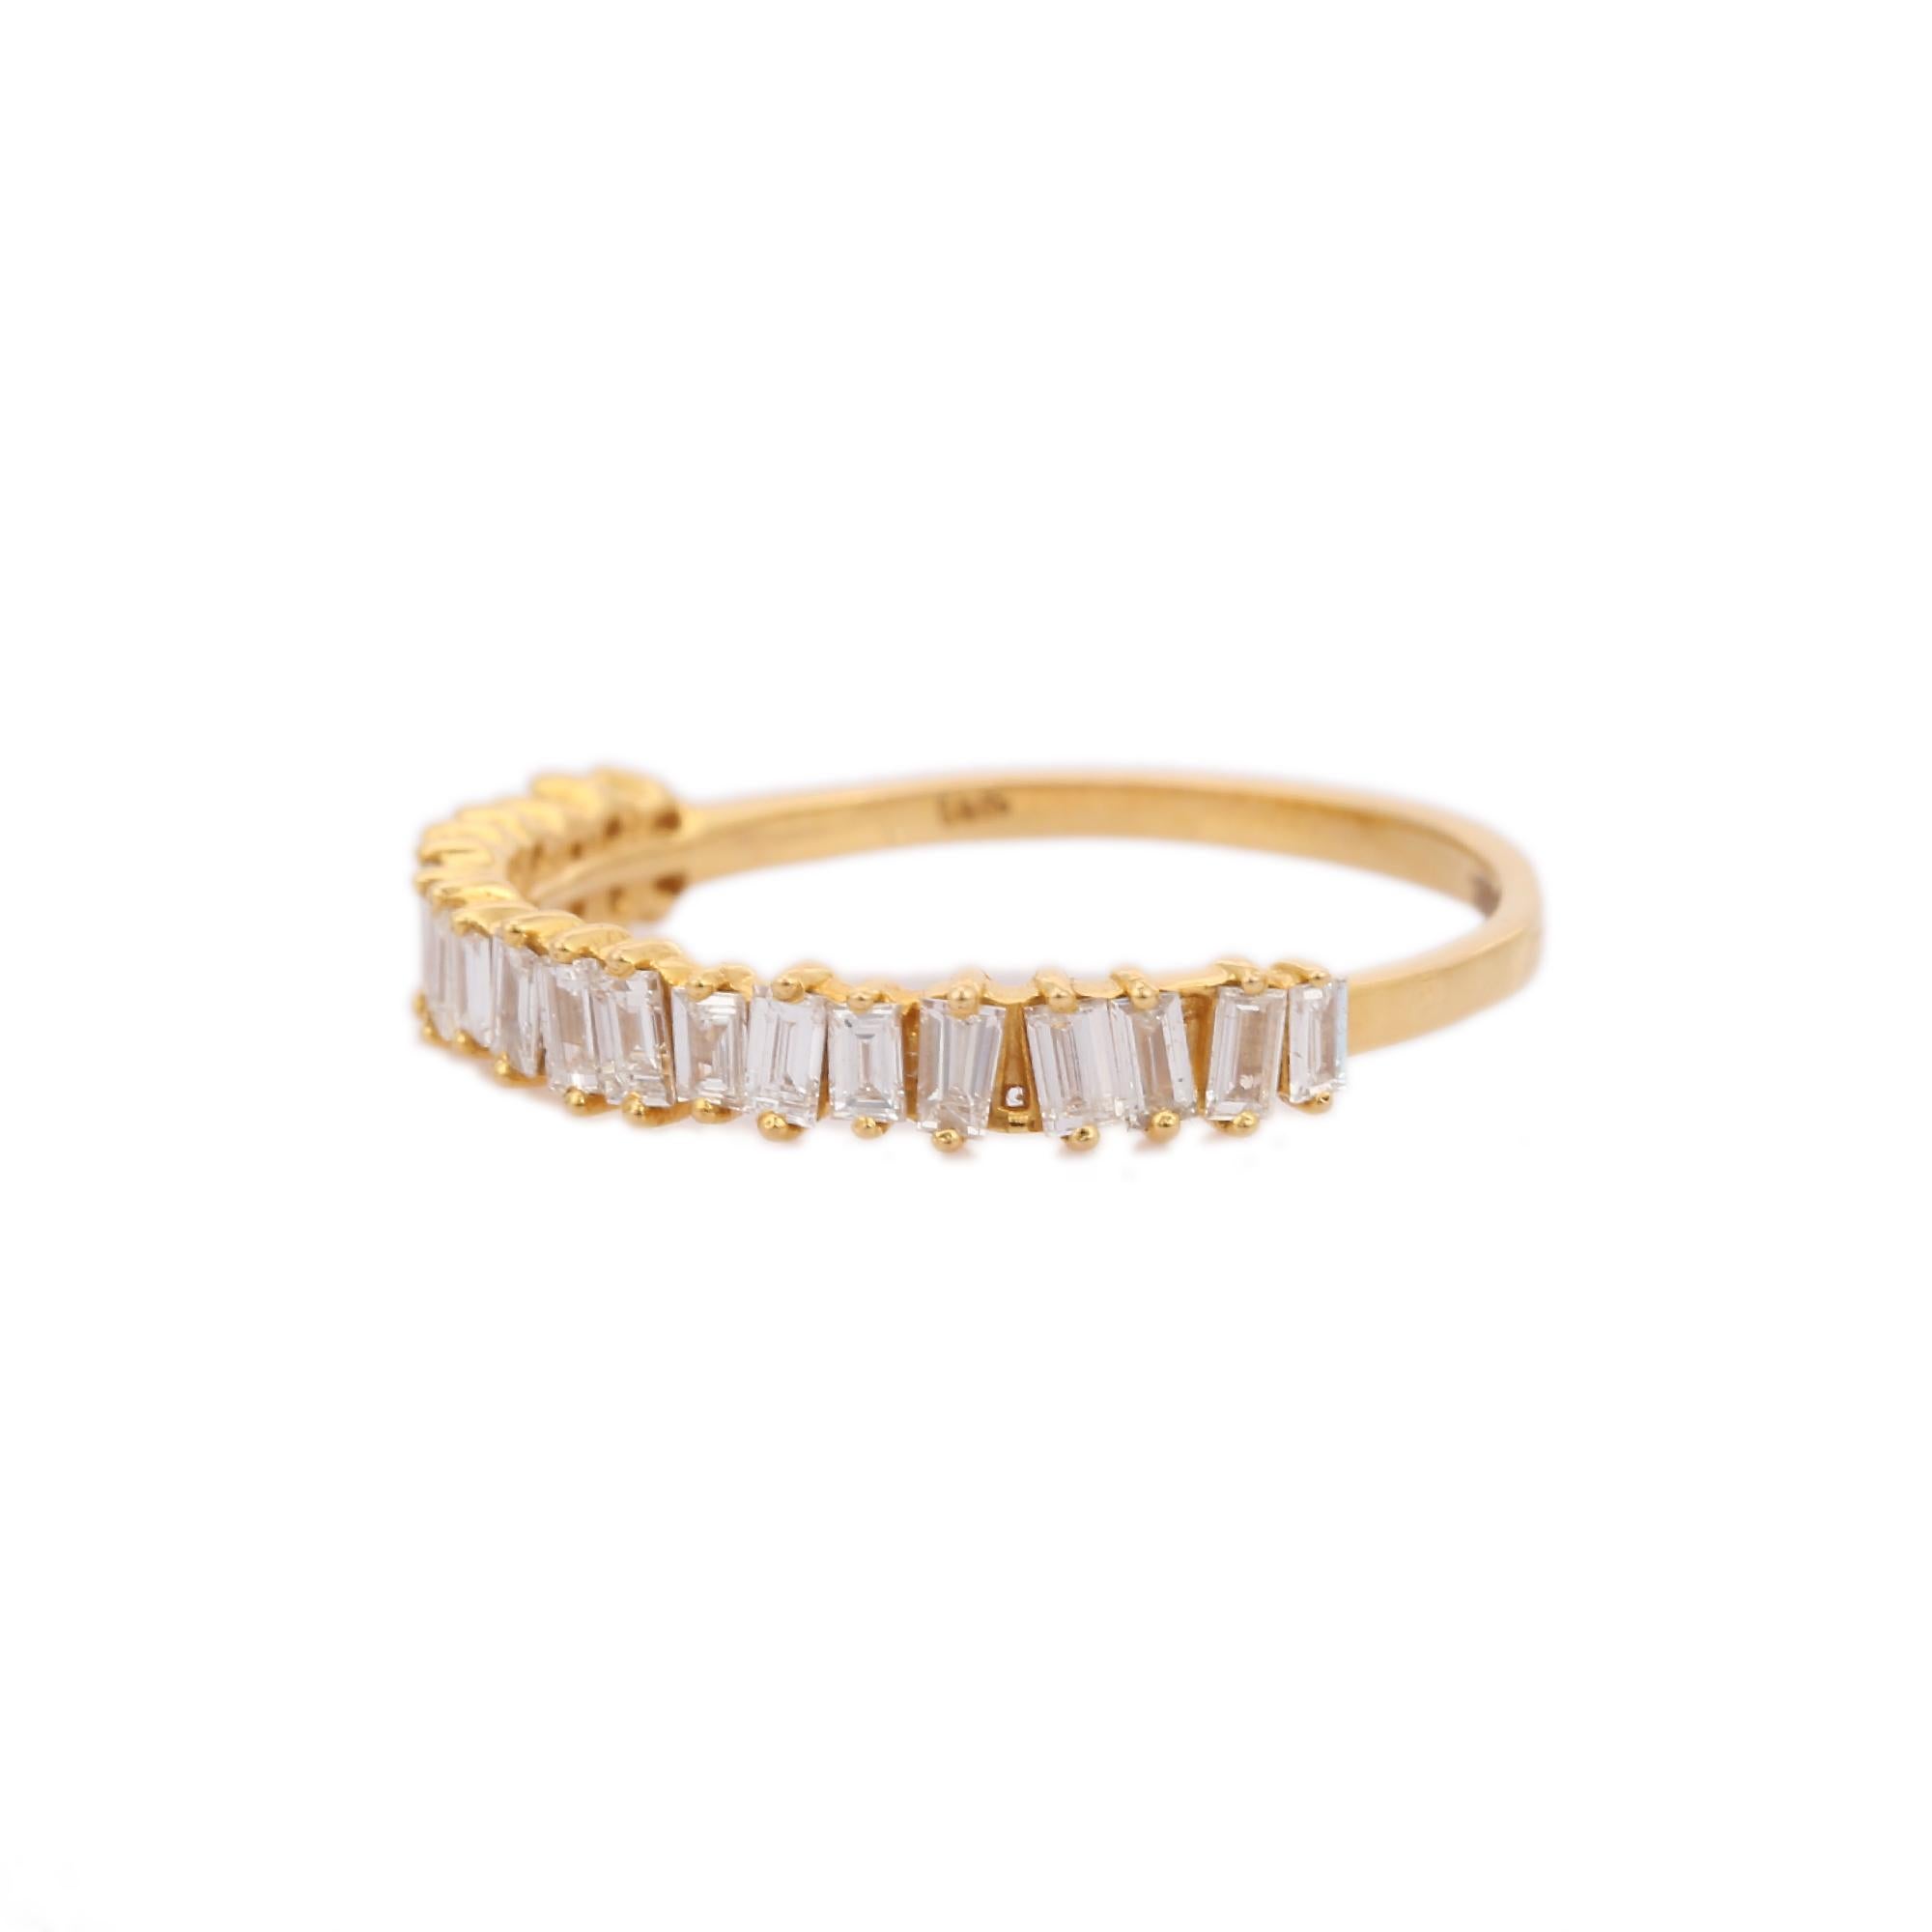 For Sale:  Minimalist Baguette Diamond Band Ring 18K Yellow Gold Stackable Engagement Band 5